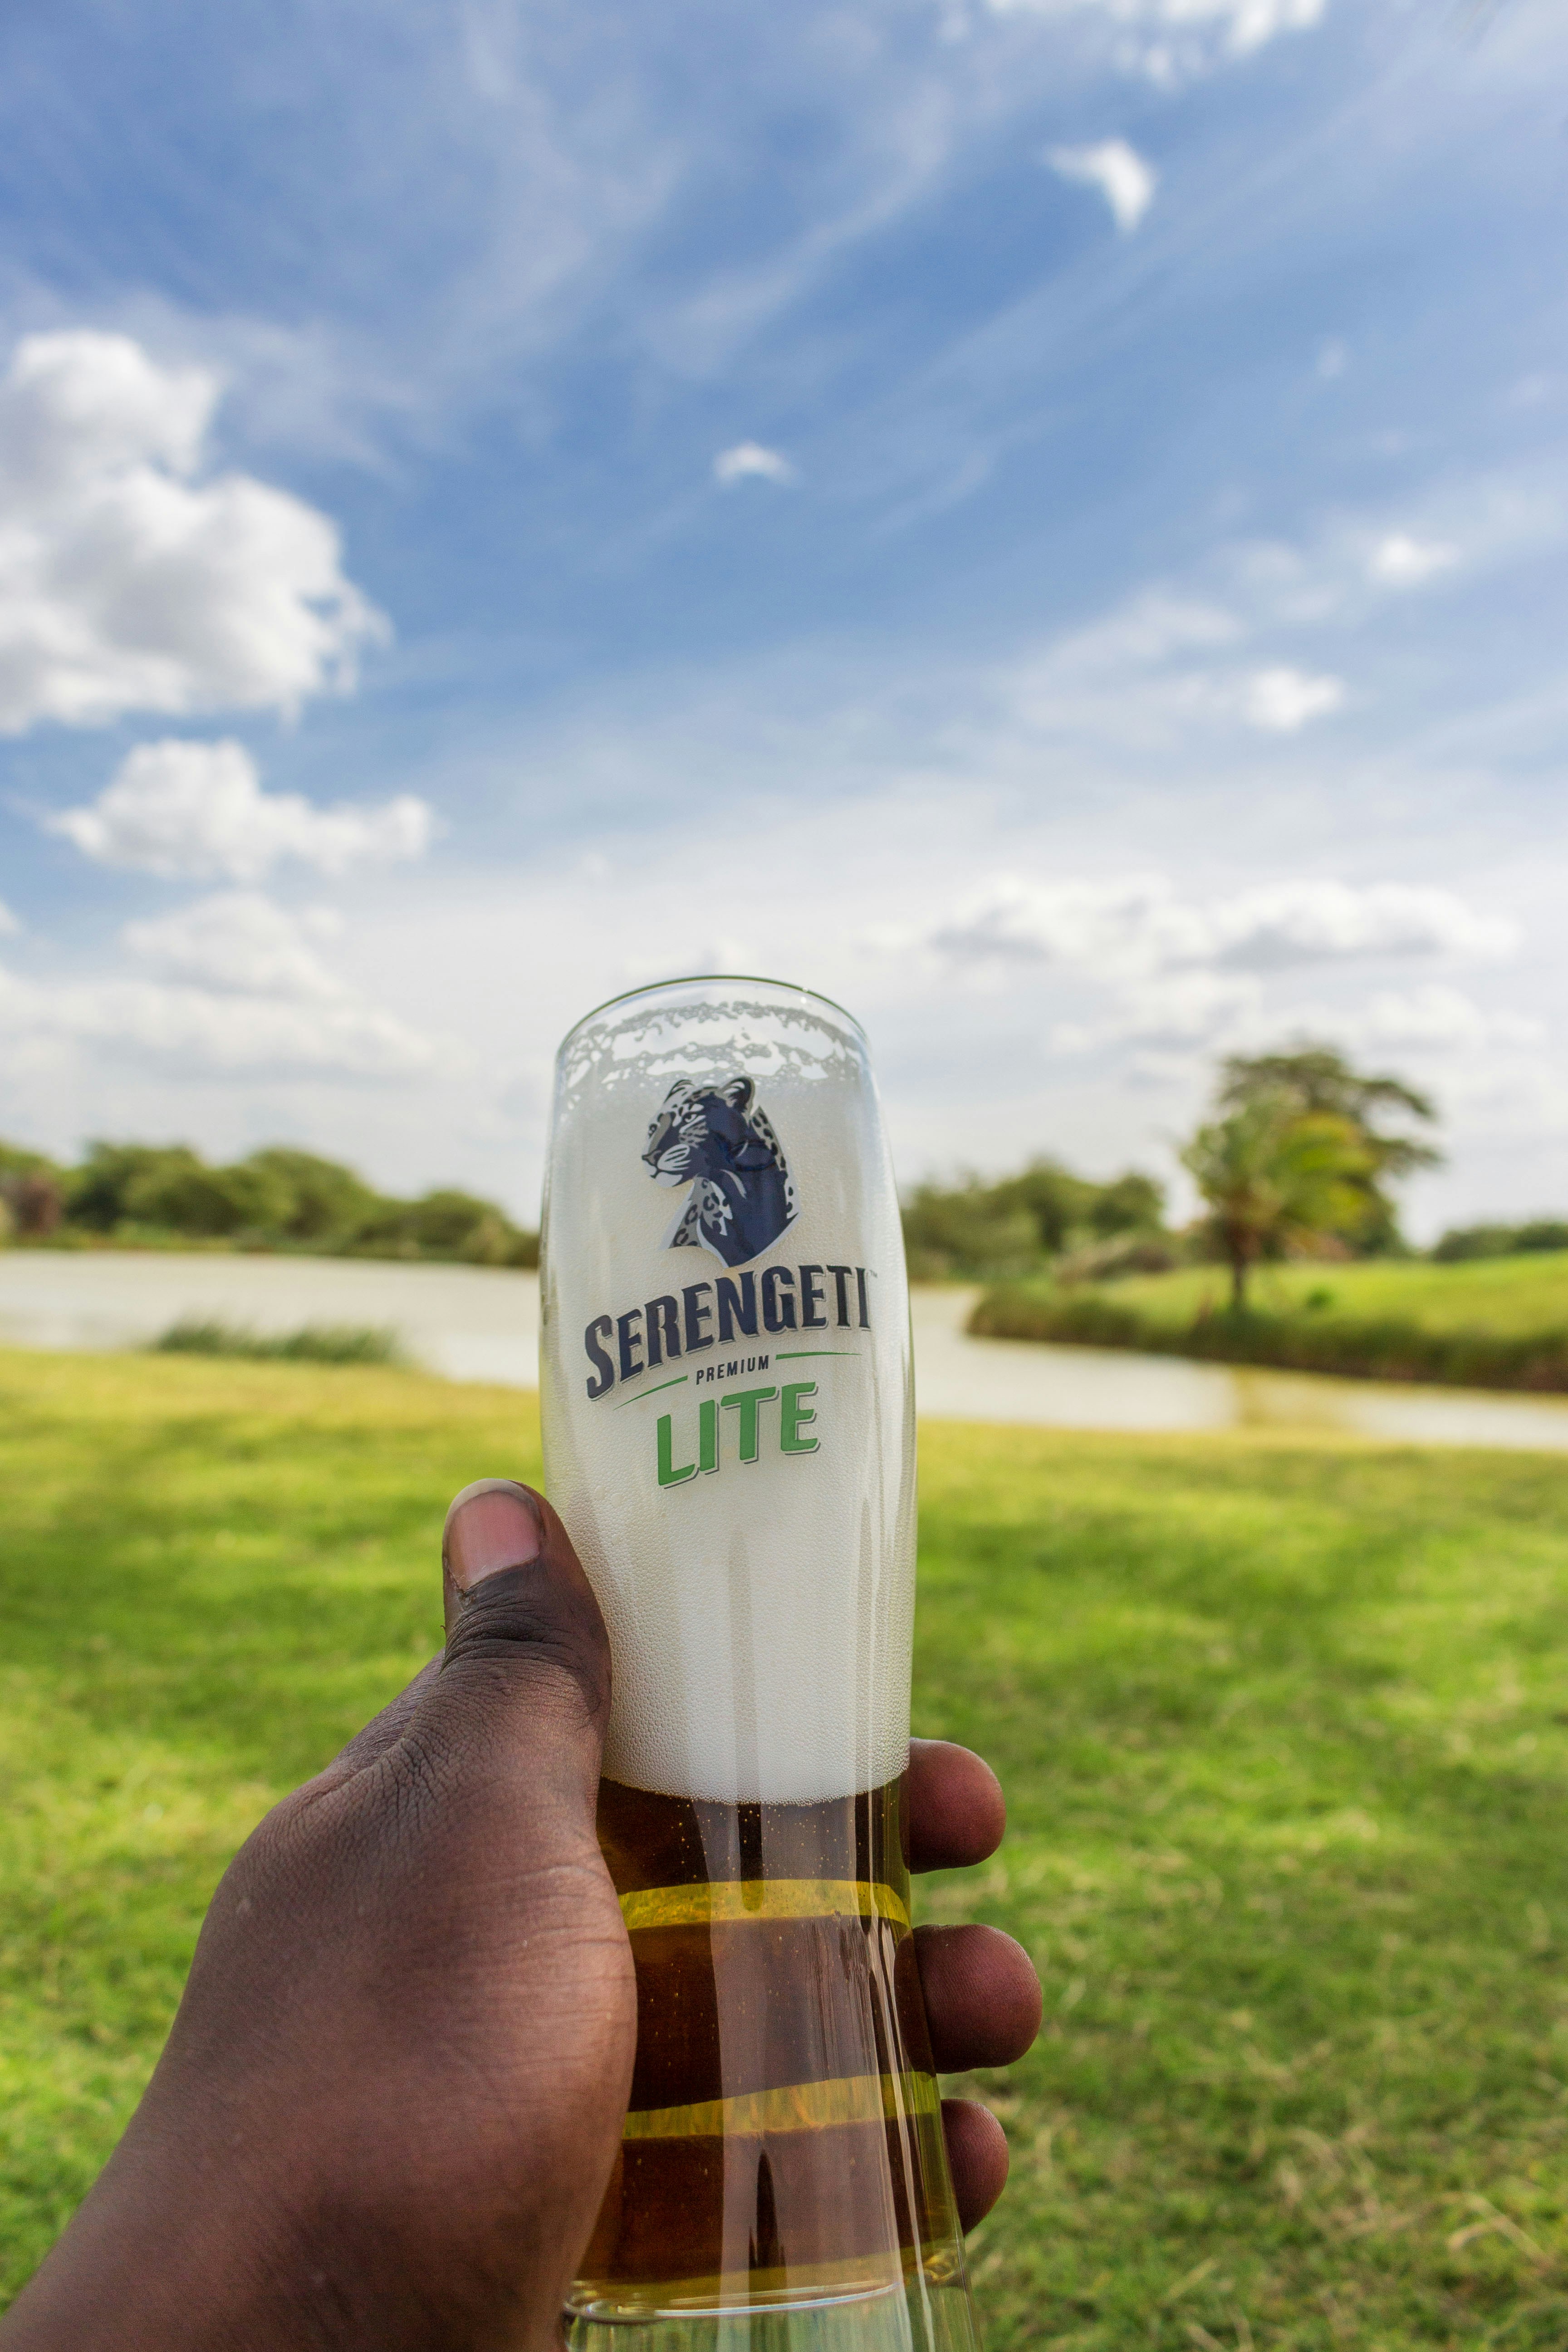 Enjoying a cold Serengeti premier beer on a sunny day.